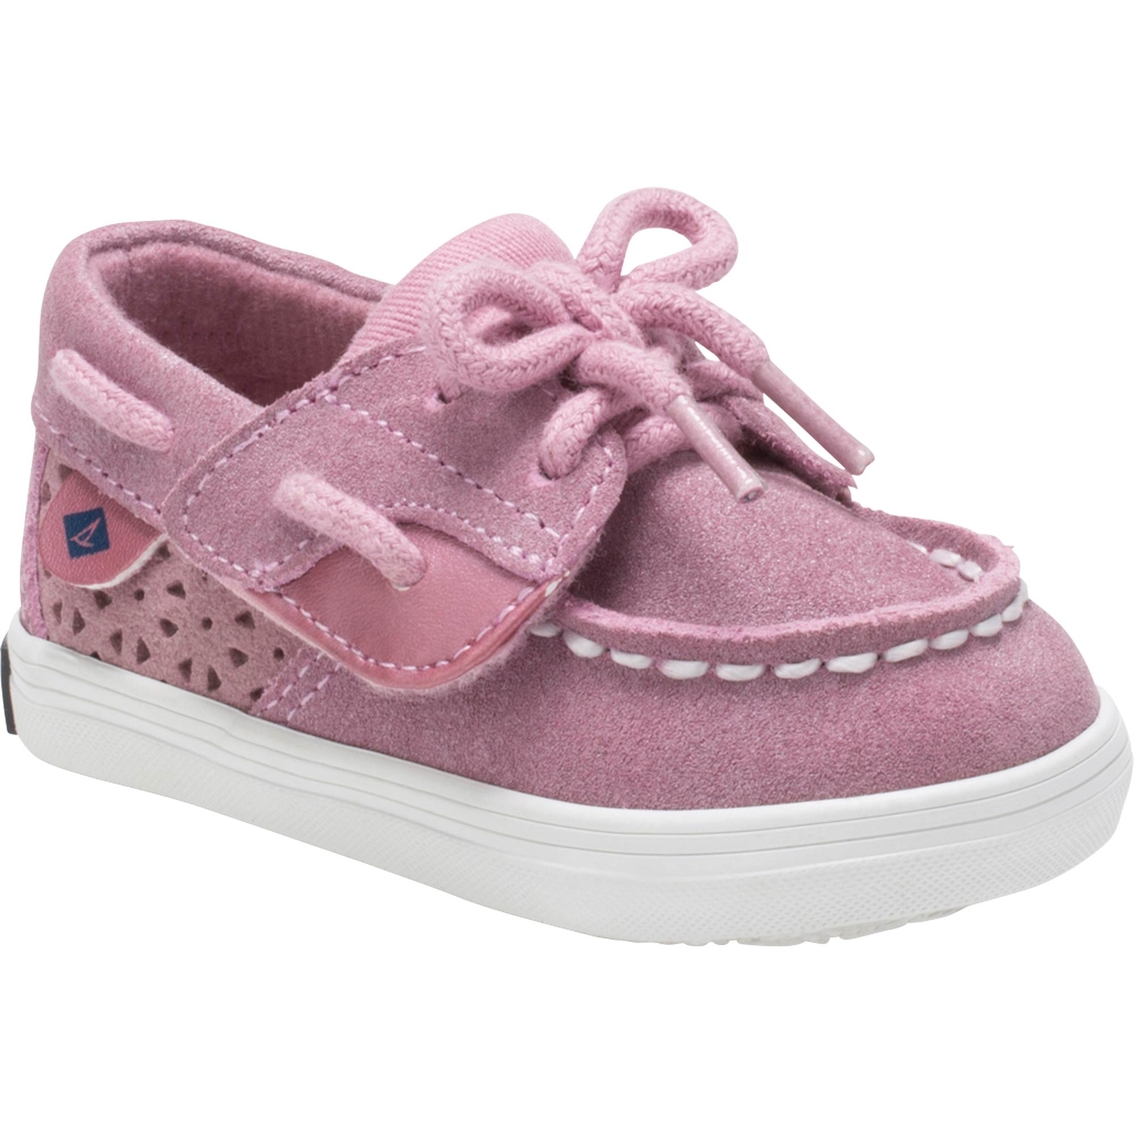 sperry baby shoes girl